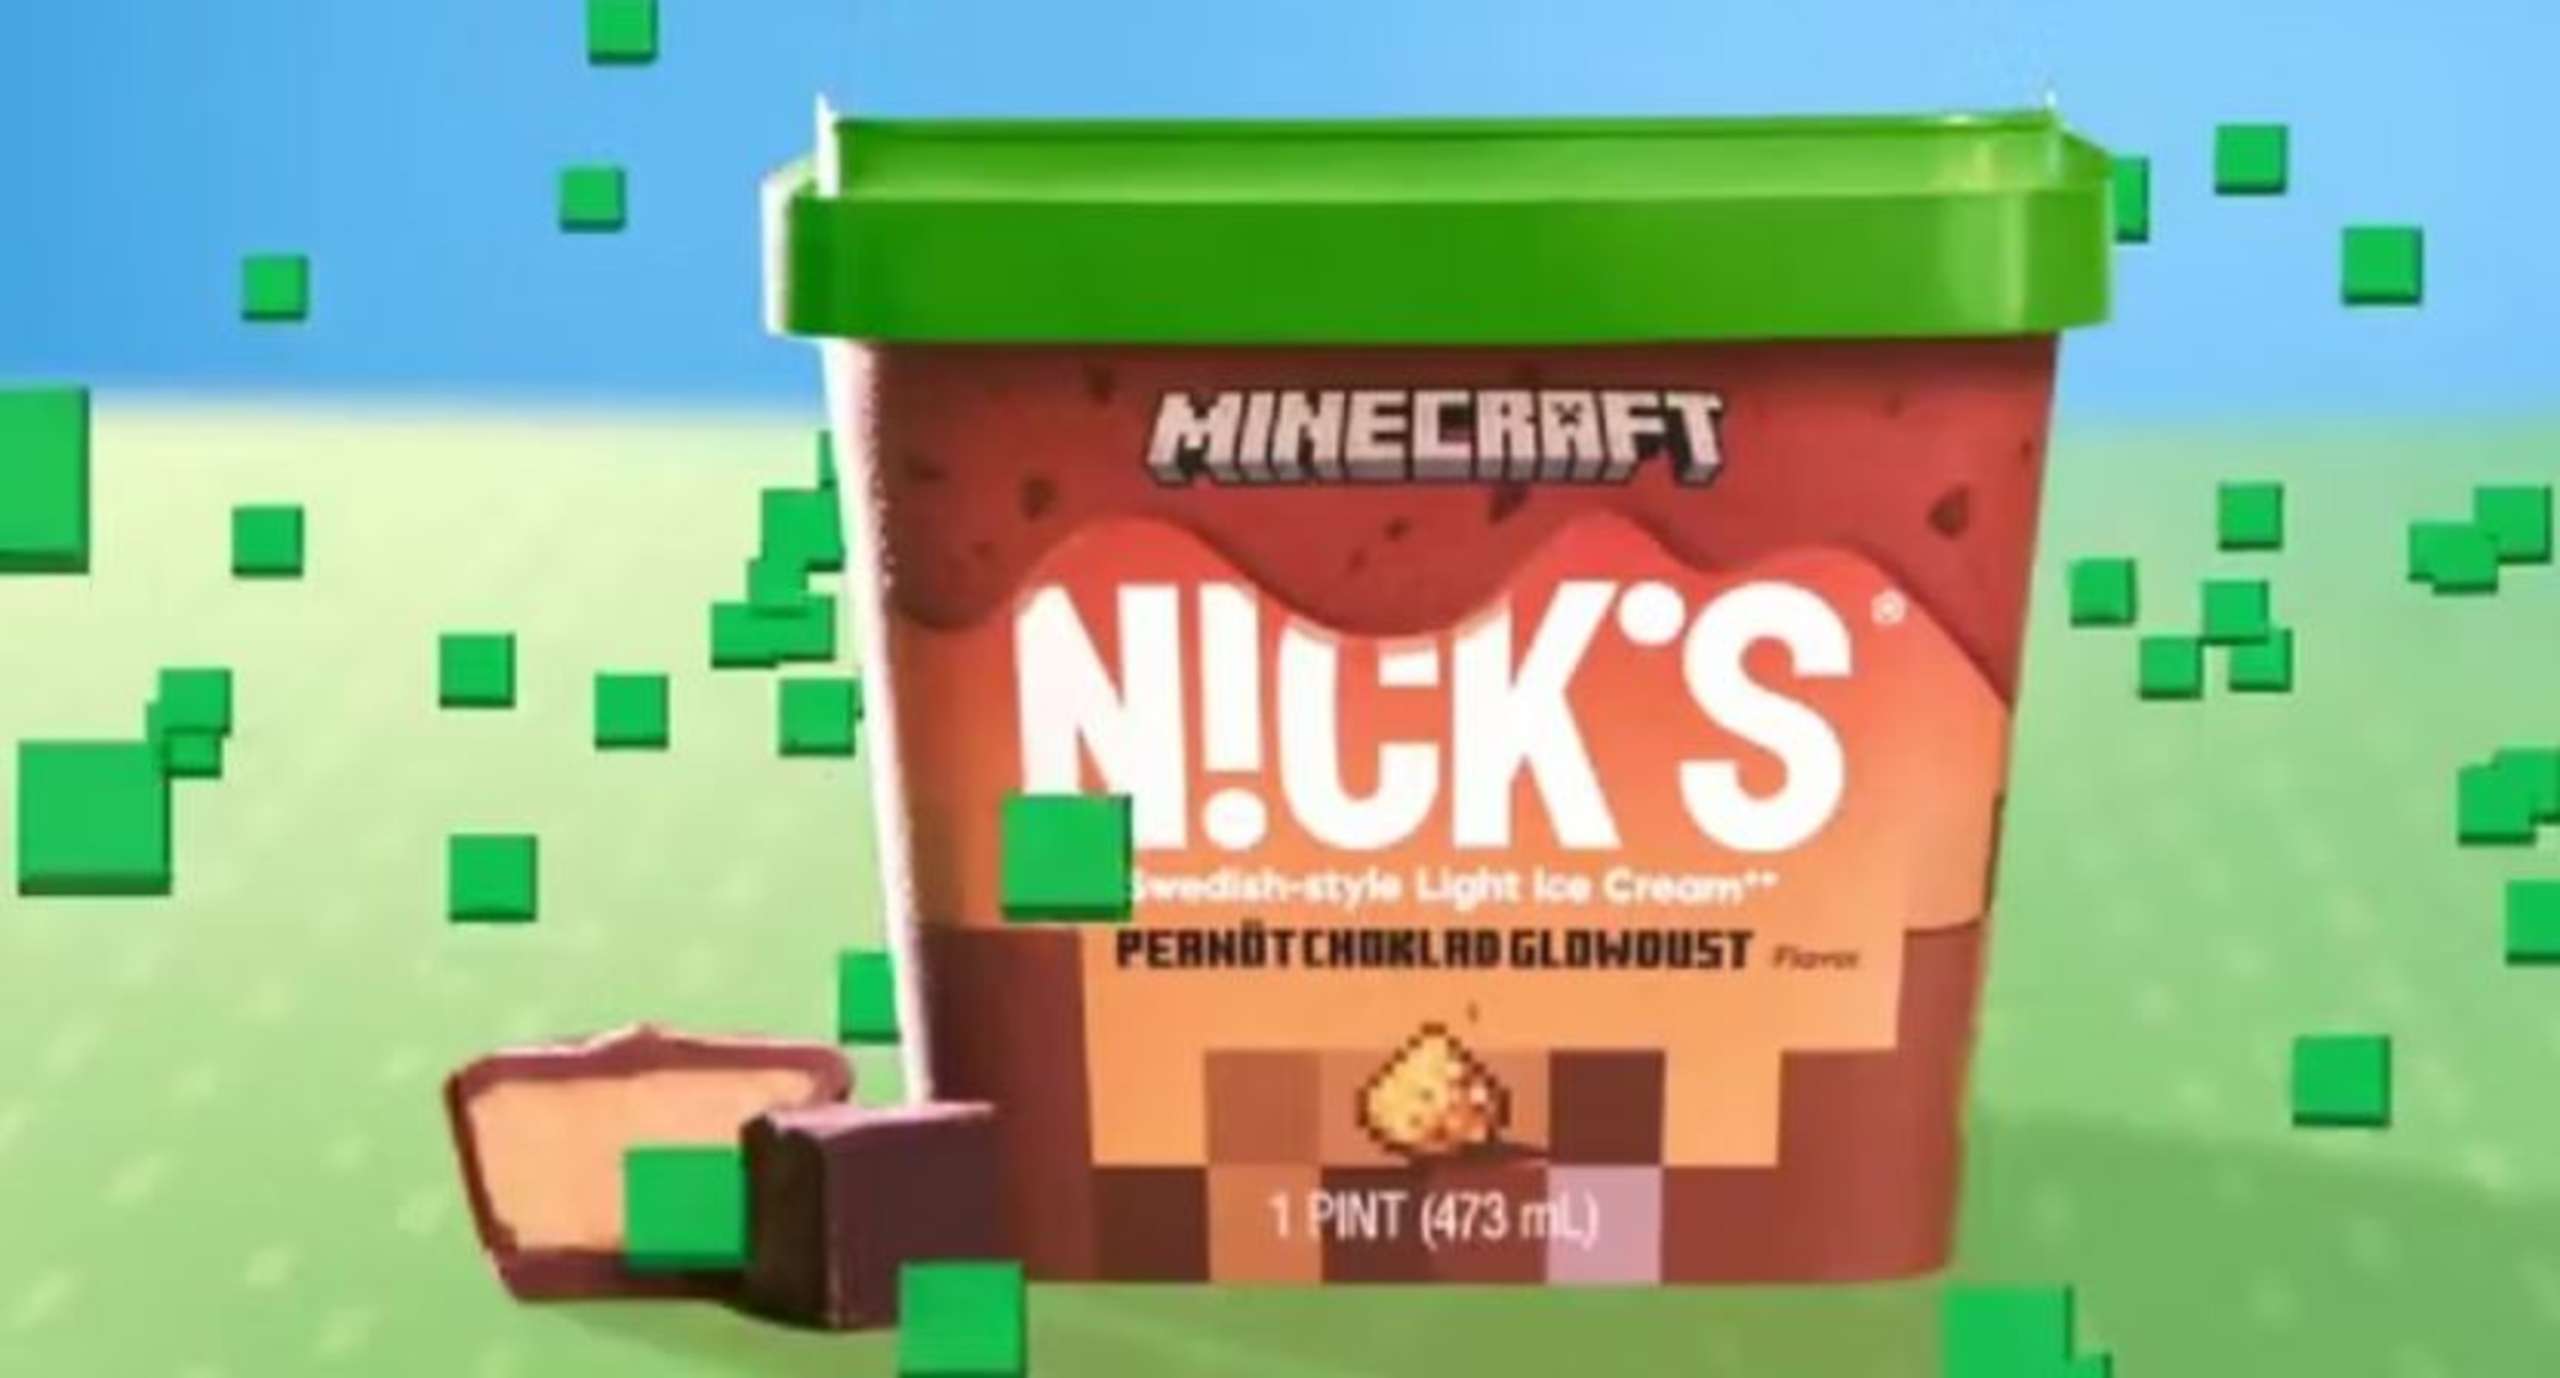 Four Flavors Of Ice Cream Based On Blocks And Other Minecraft Themes Will Be Available For A Limited Time